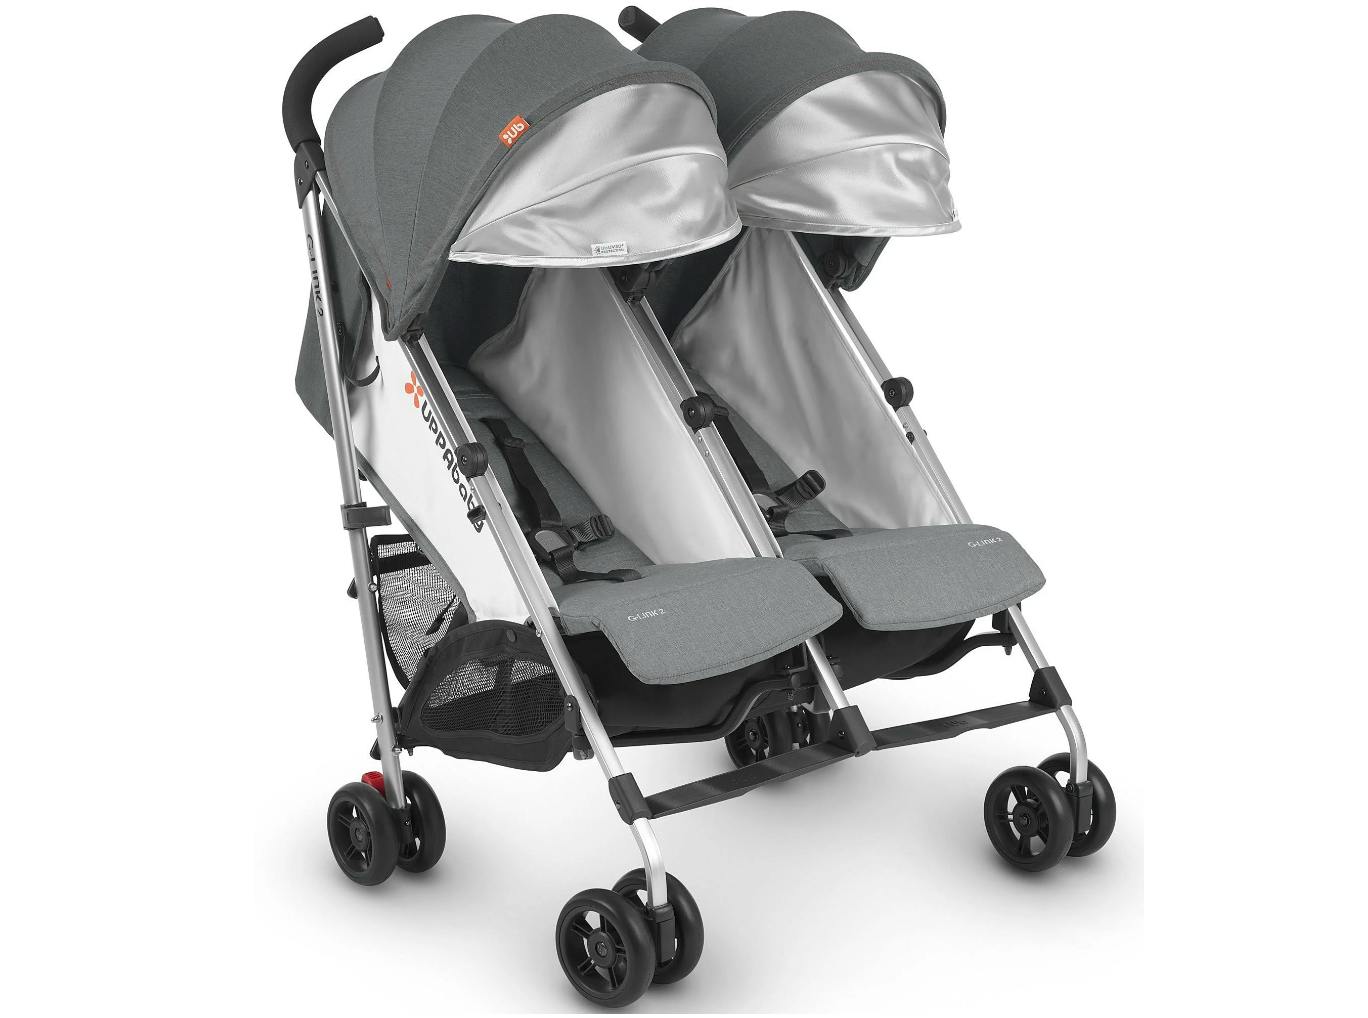 The UPPAbaby G-LINK 2 Double Stroller.